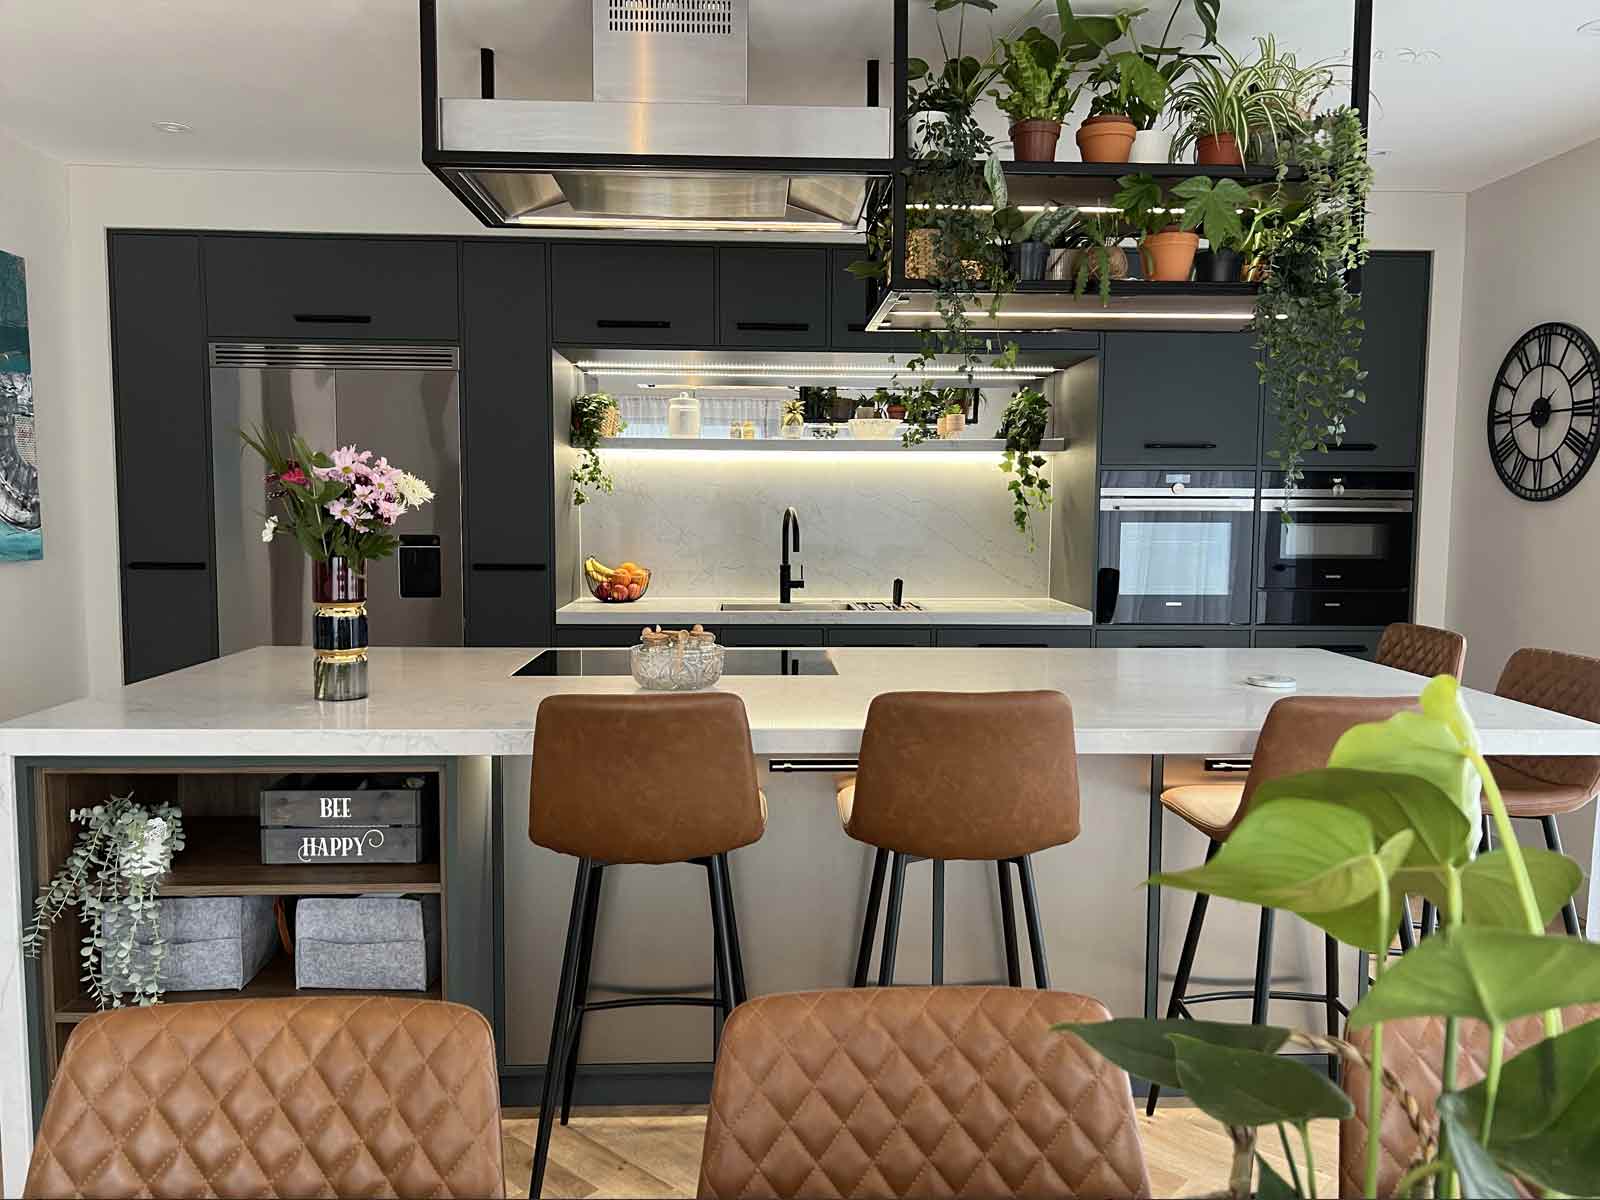 A kitchen with a biophilic design, including plants hanging front the ceiling